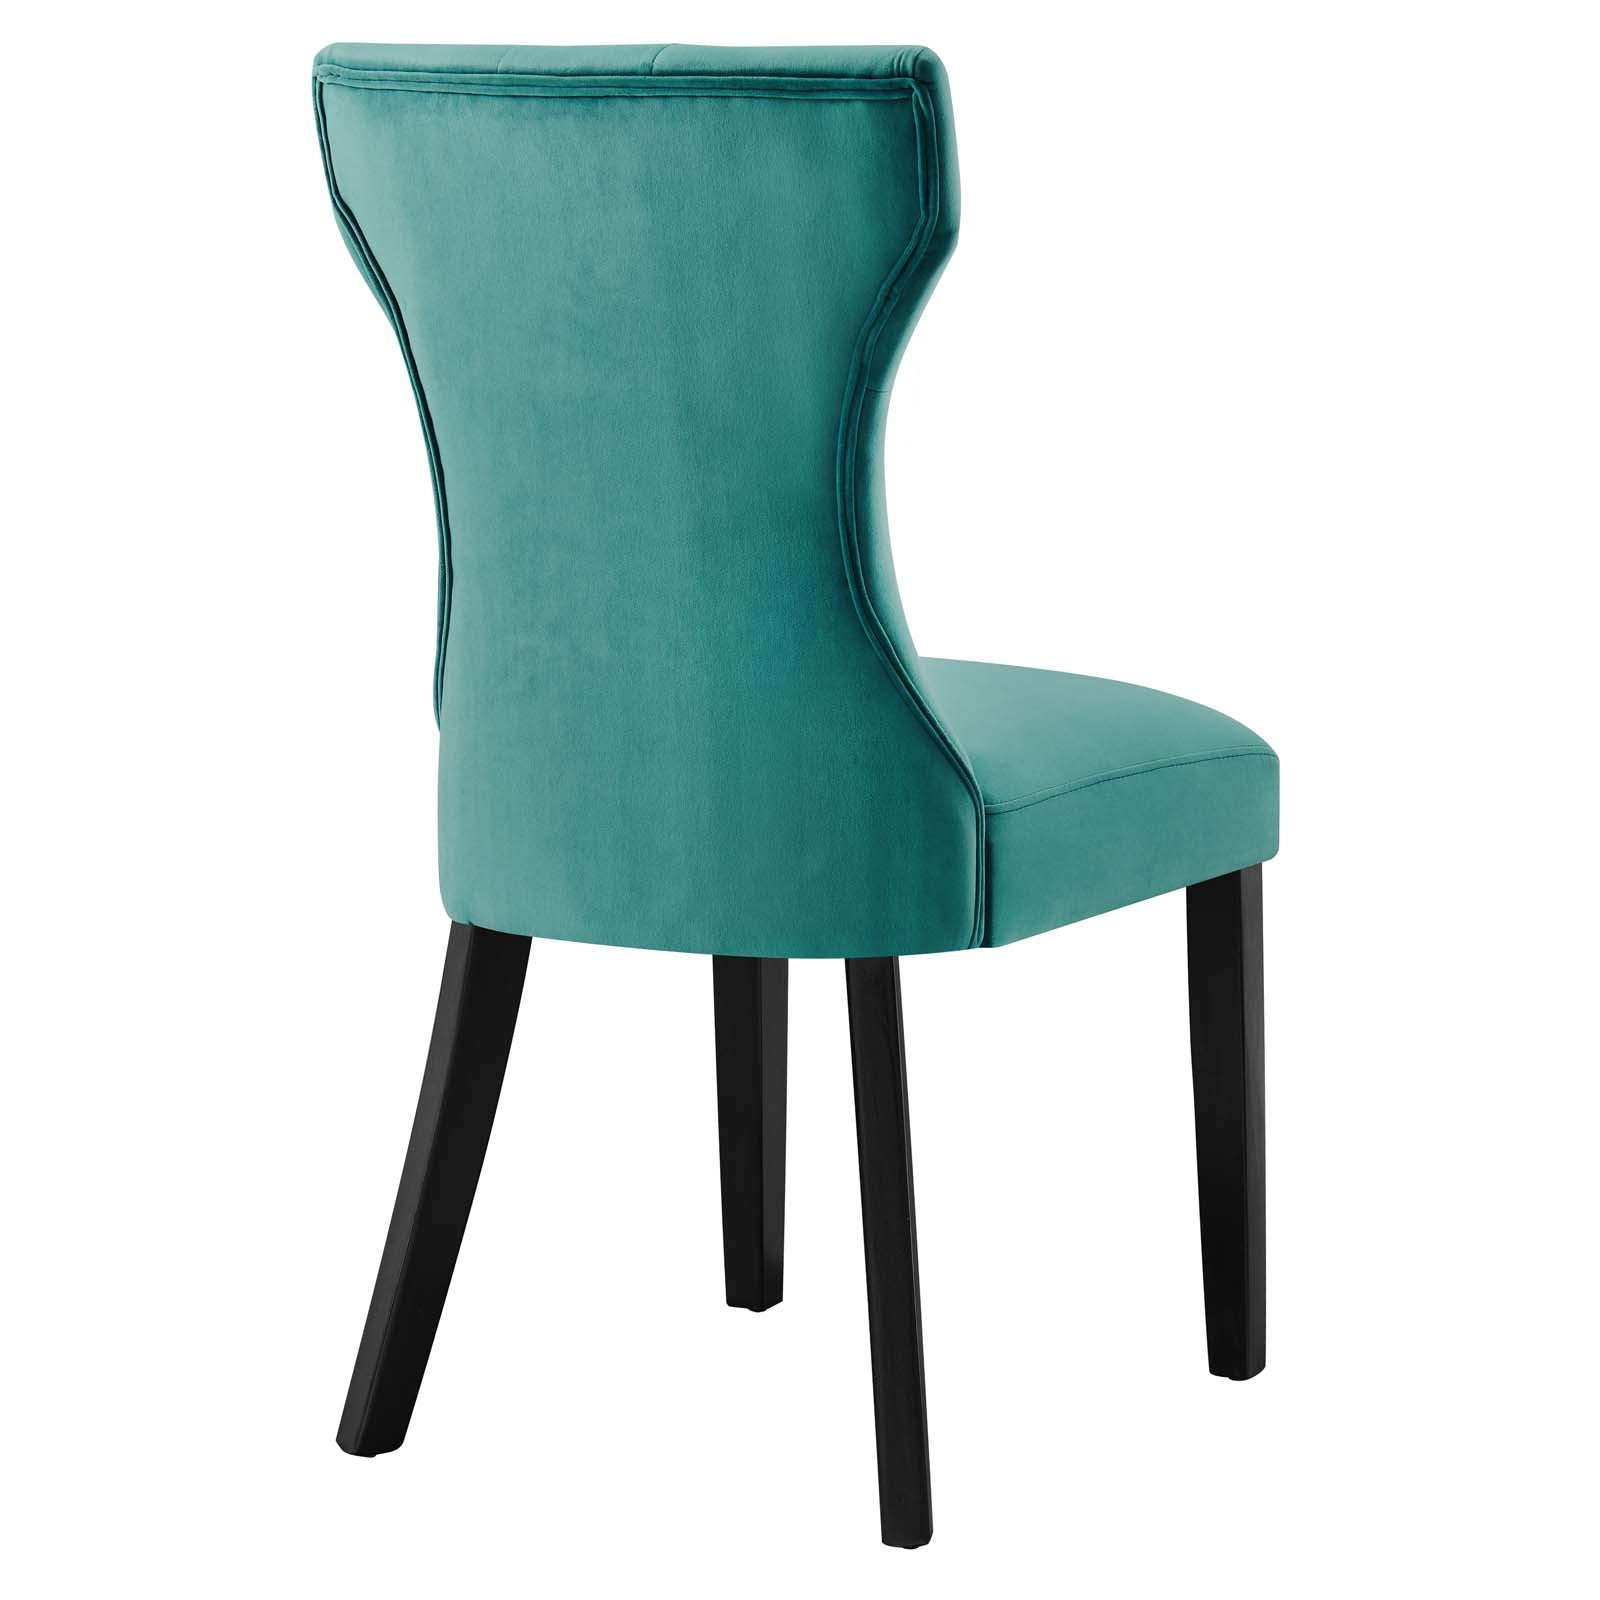 Modway Dining Chairs - Silhouette Performance Velvet Dining Chairs - Set of 2 Teal